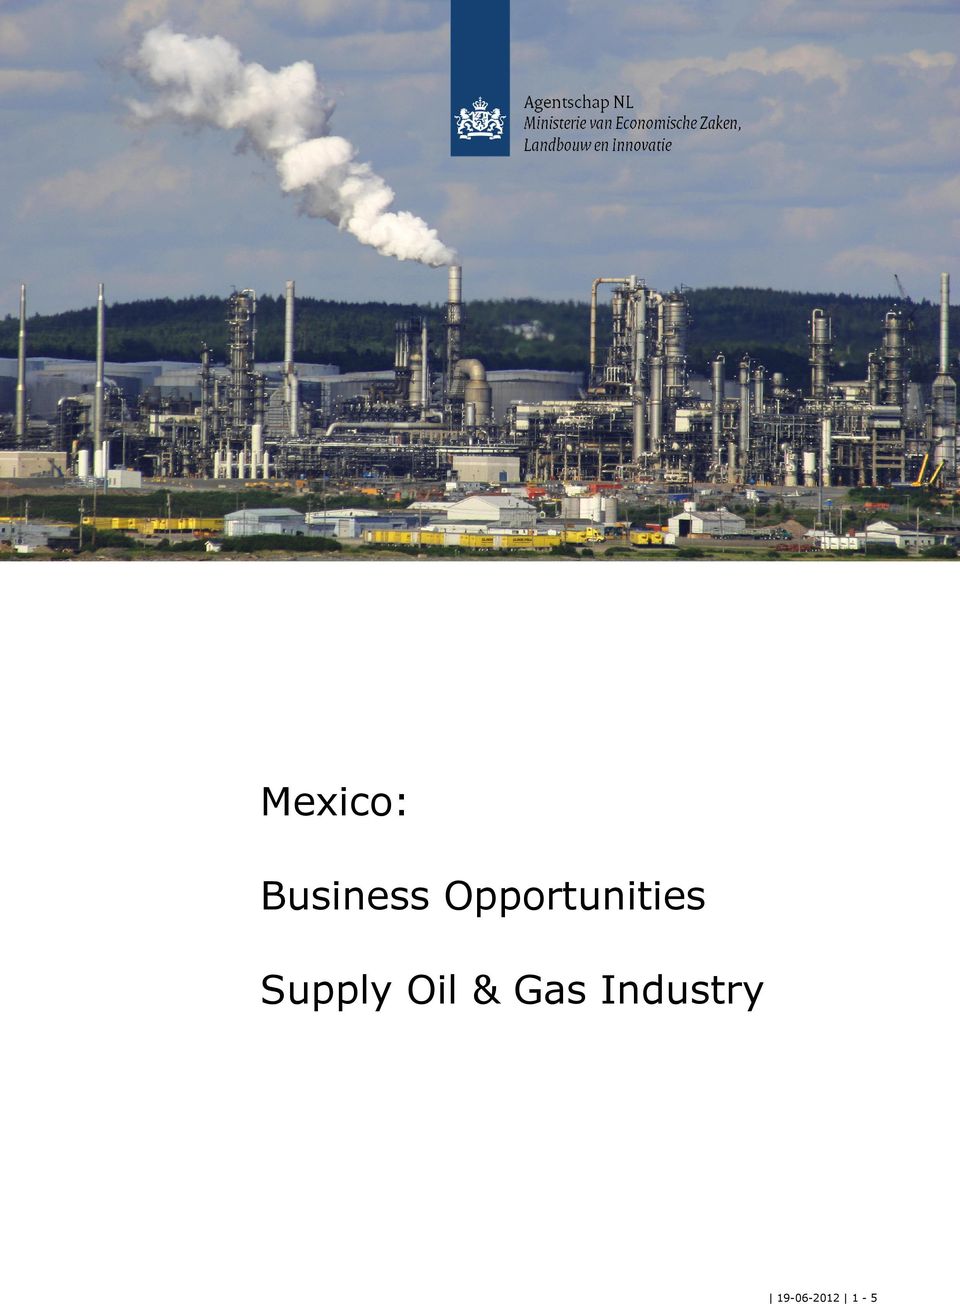 Supply Oil & Gas